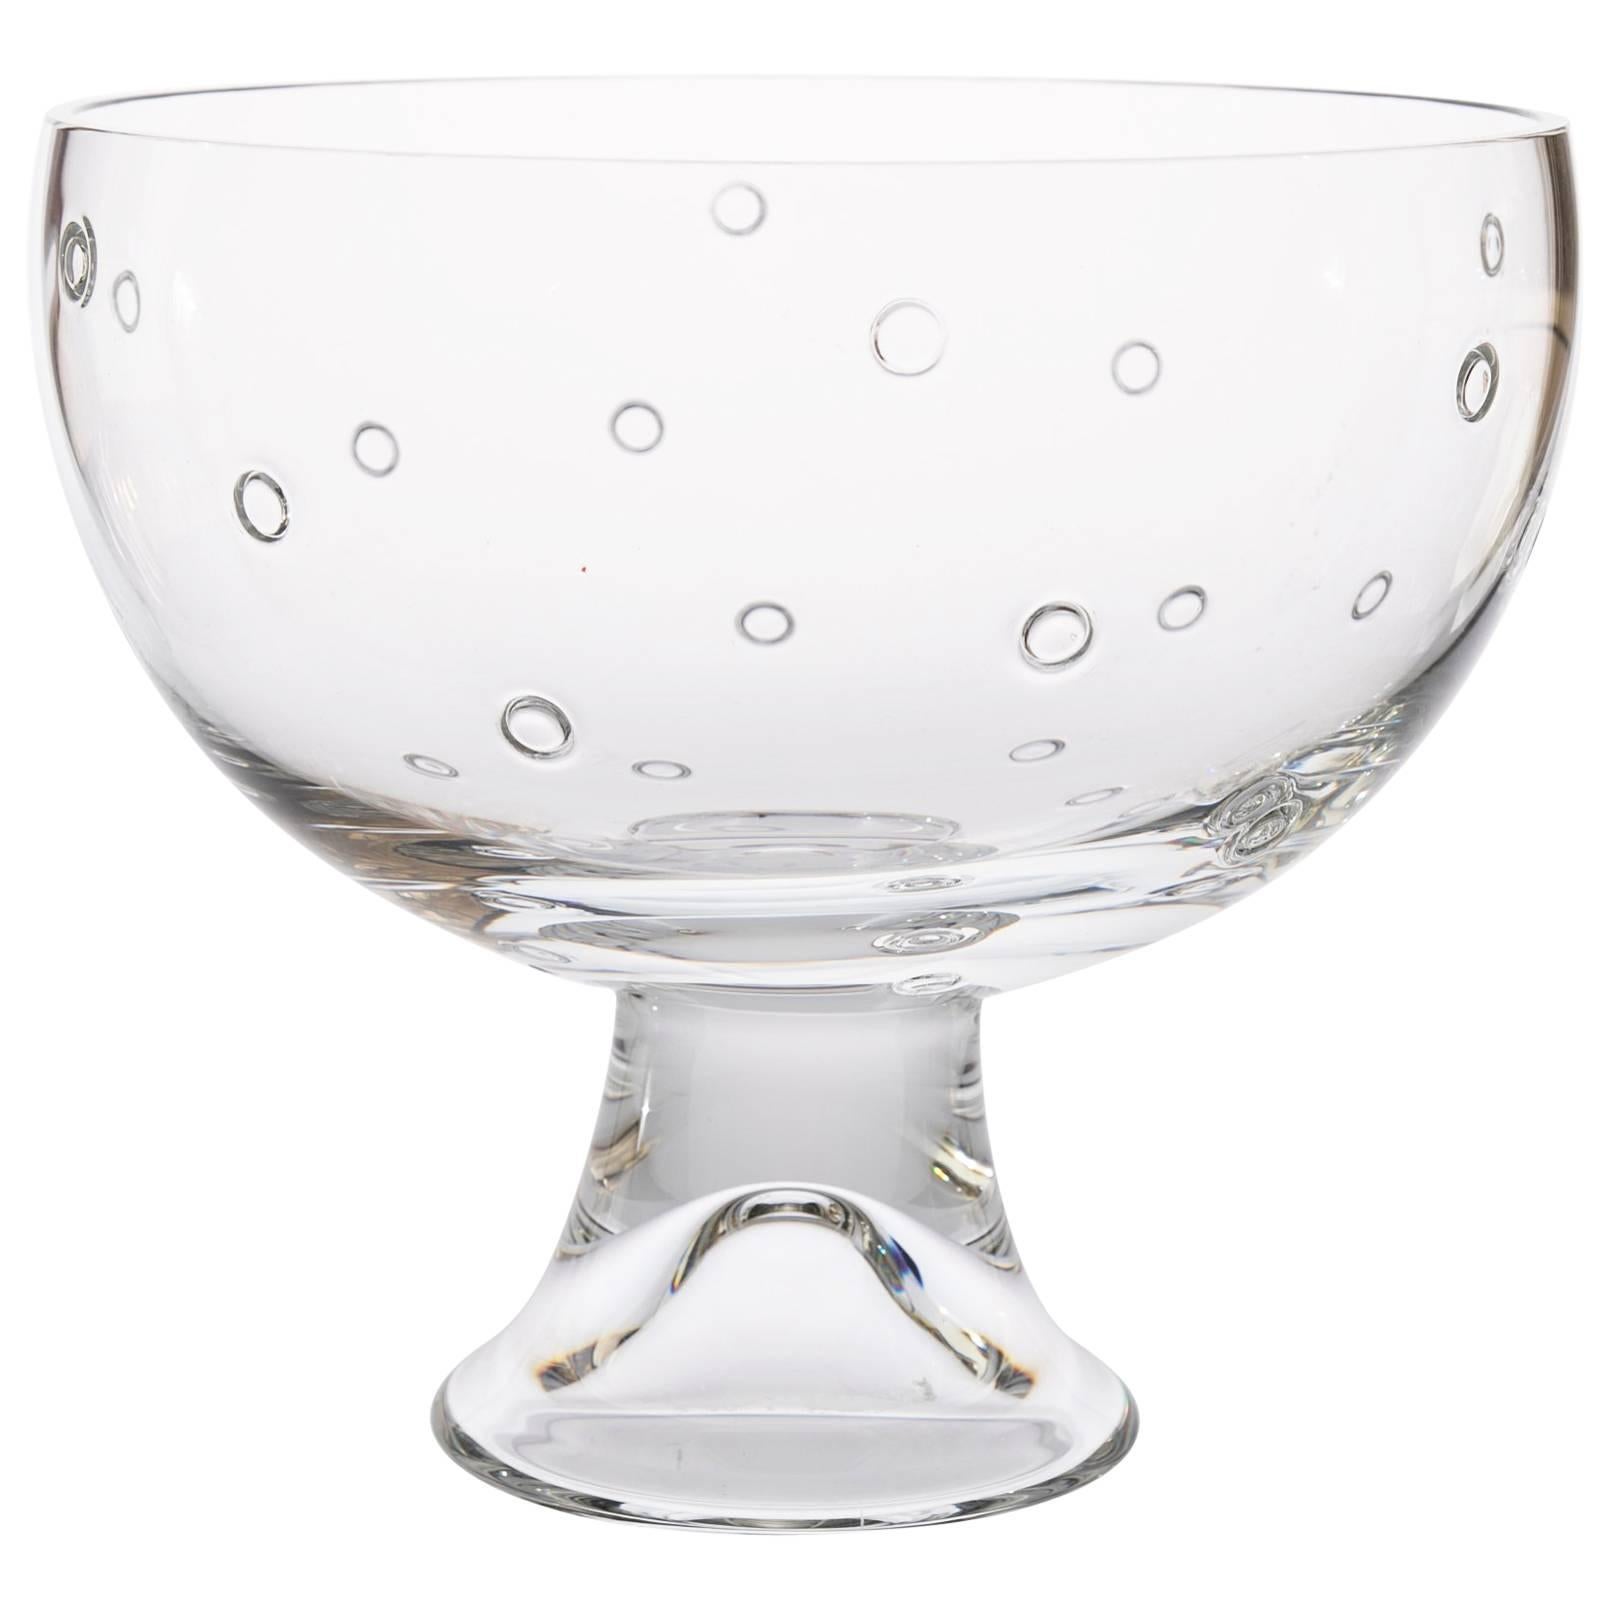 Large Steuben Footed Bowl with Floating Bubble